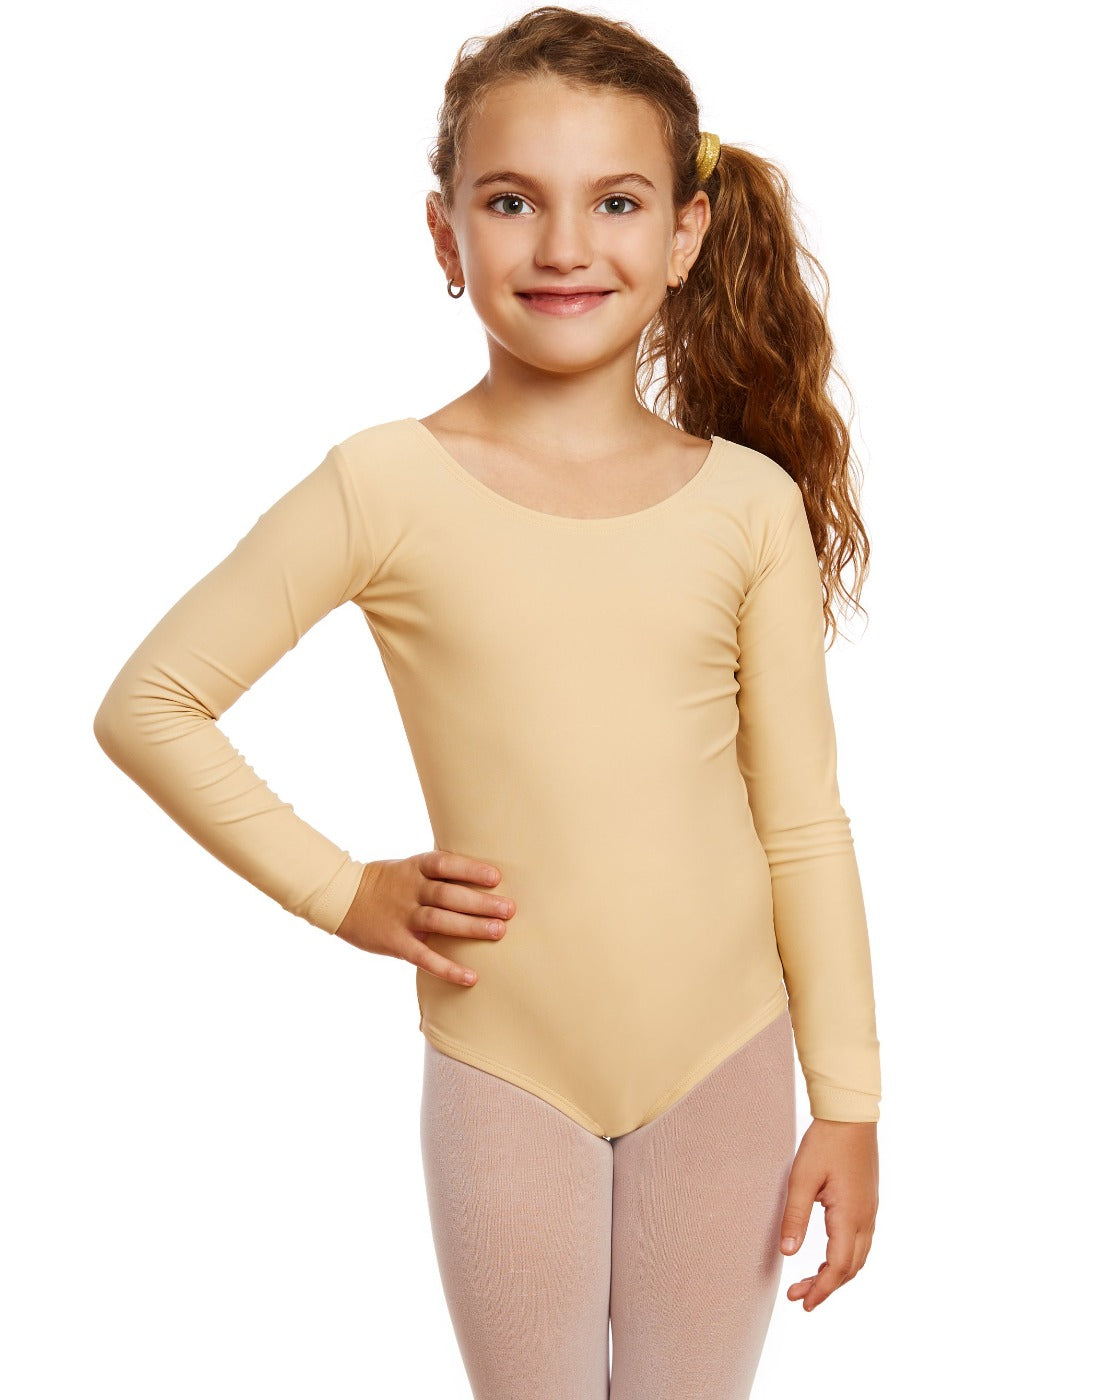 Ruffle Sleeves New Designs Good Quality Young Girls Solid Colors Kids Nylon  Spandex Dance Wear Ballet Leotard - China Ruffle Sleeves Ballet Leotard and  Solid Colors Dance Leotards price